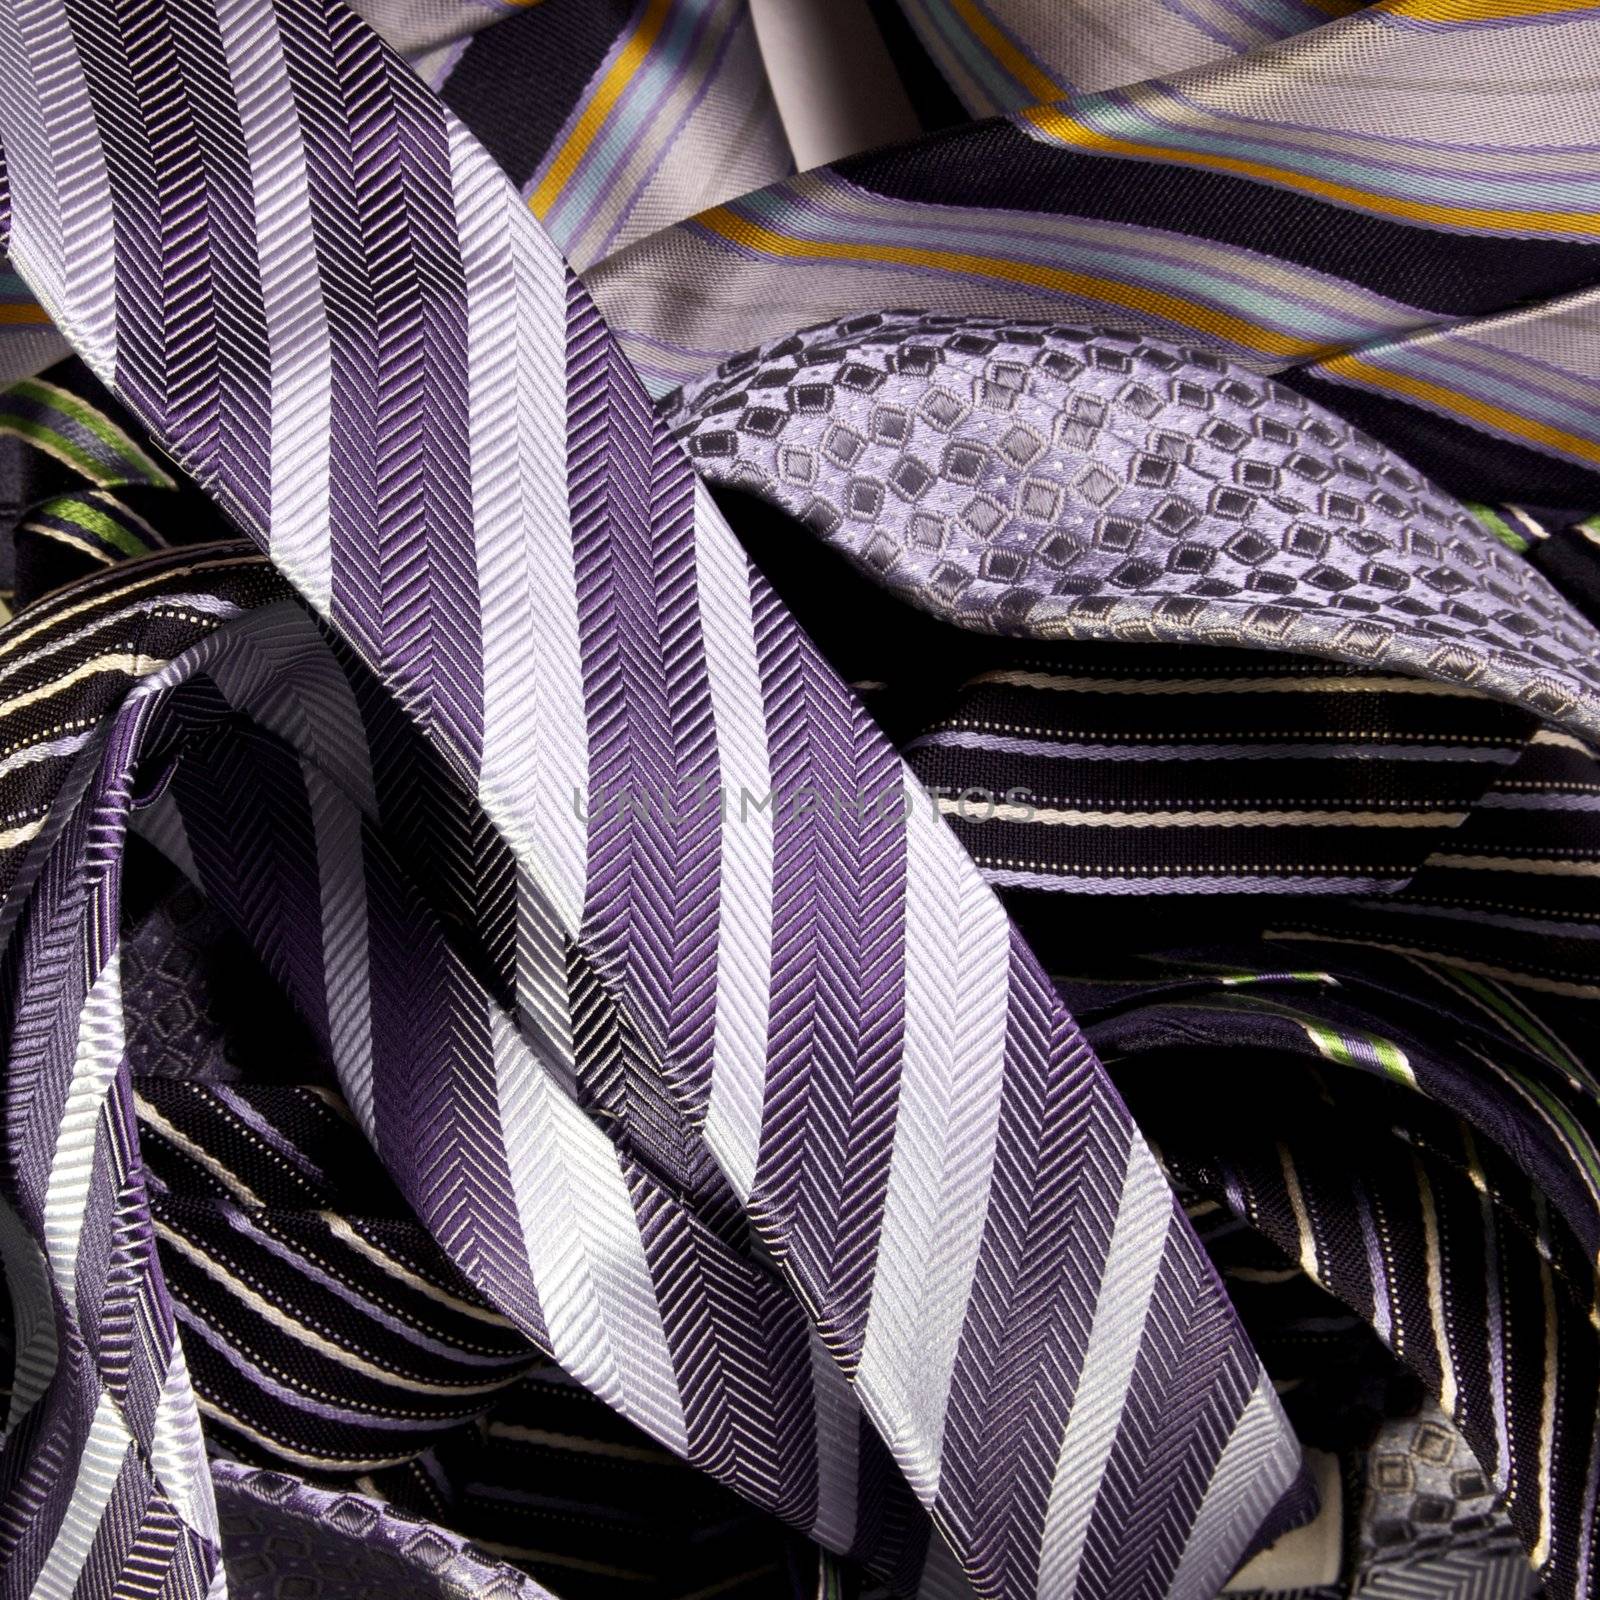 Assortment of mens neck ties in a pile